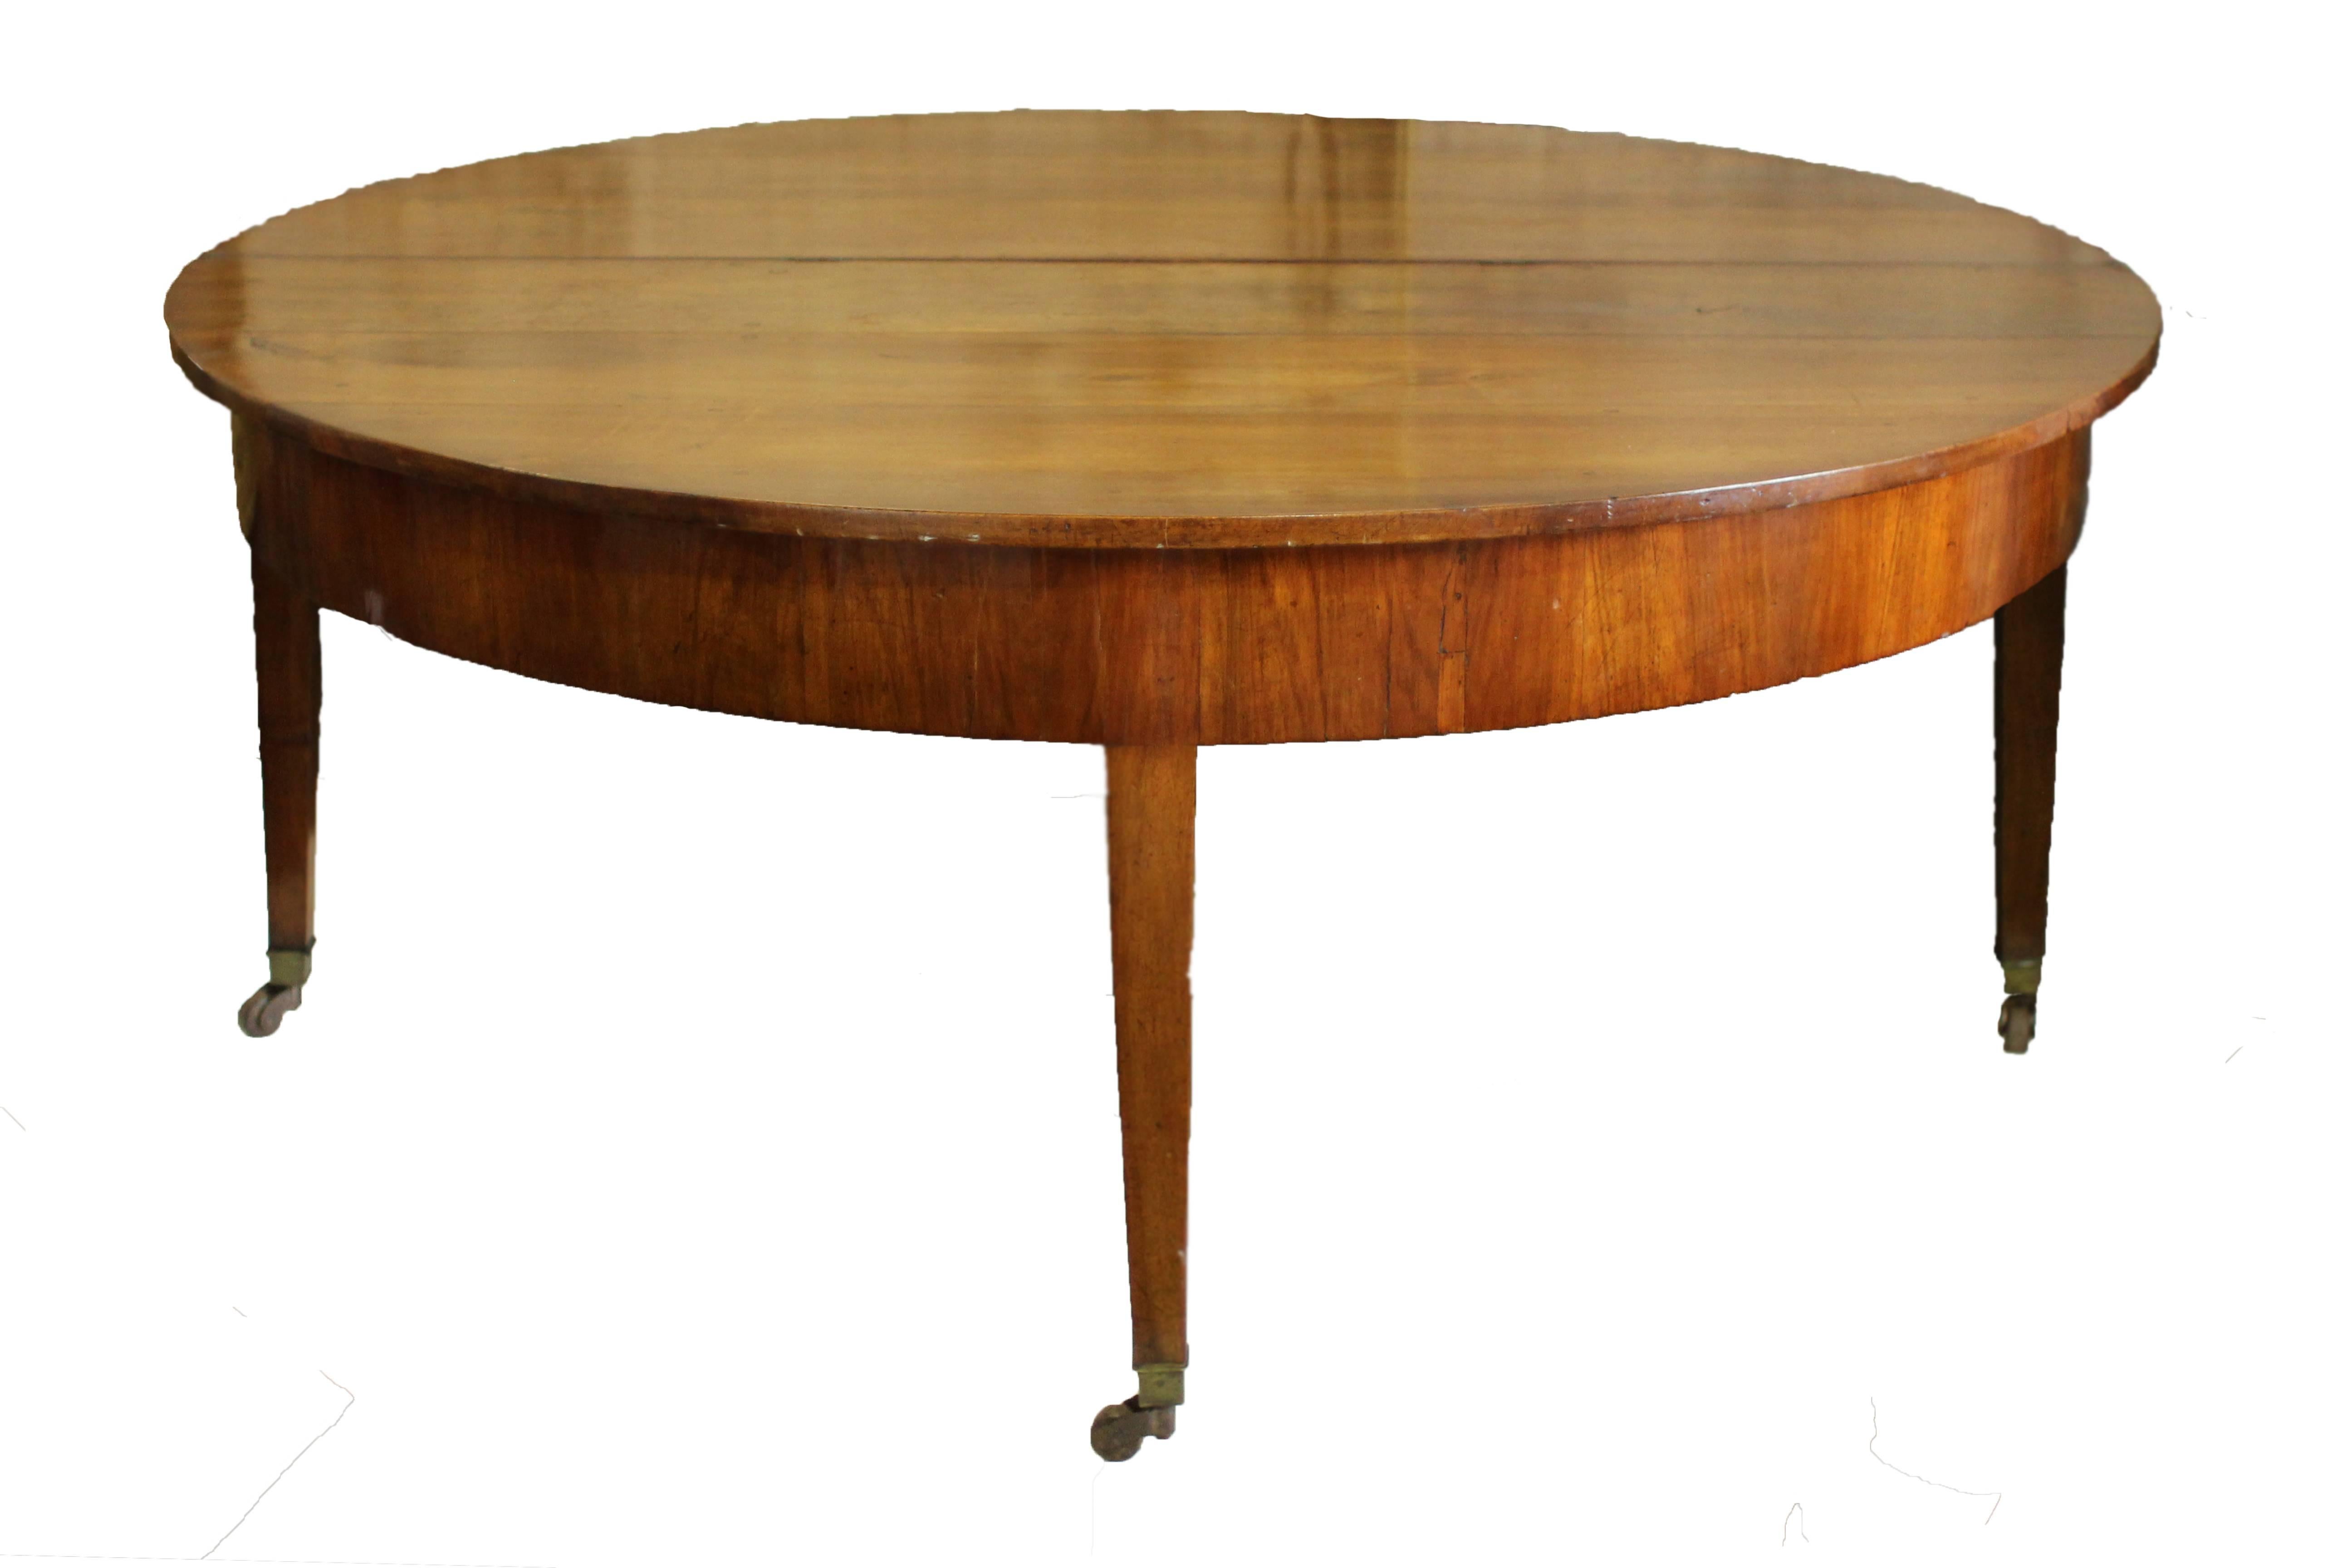 Extraordinary round table with drop-leaf fold to make a demilune. Beautiful walnut with four legs that extend to rolling casters.

Fully extended measurements are 66.5